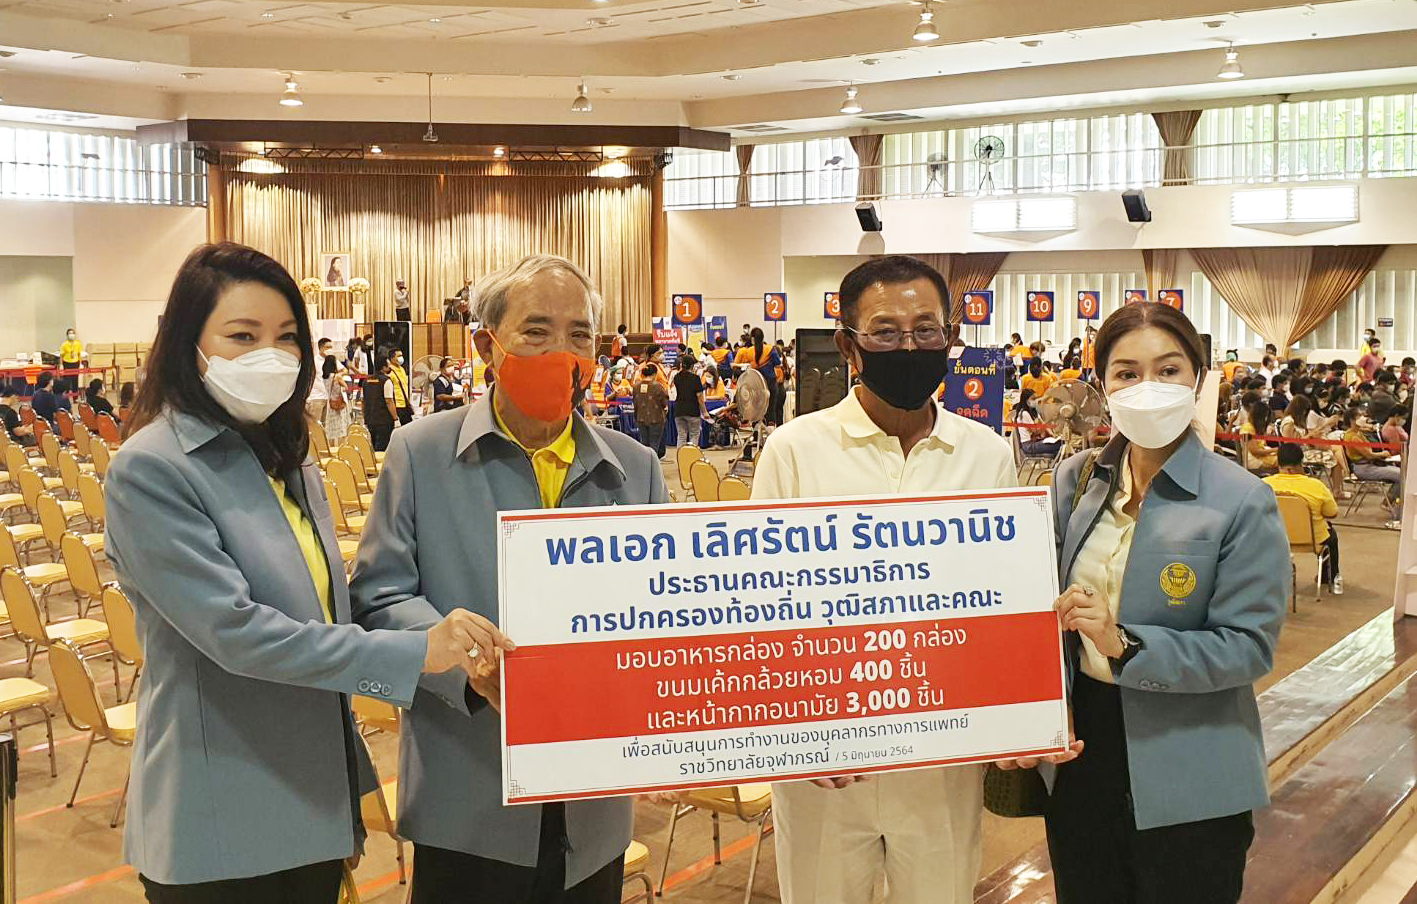 5 June 2021, at Chulabhorn Royal Academy’s COVID-19 Vaccination Service Centre in CAT Convention Hall, Chaengwattana Road, Bangkok